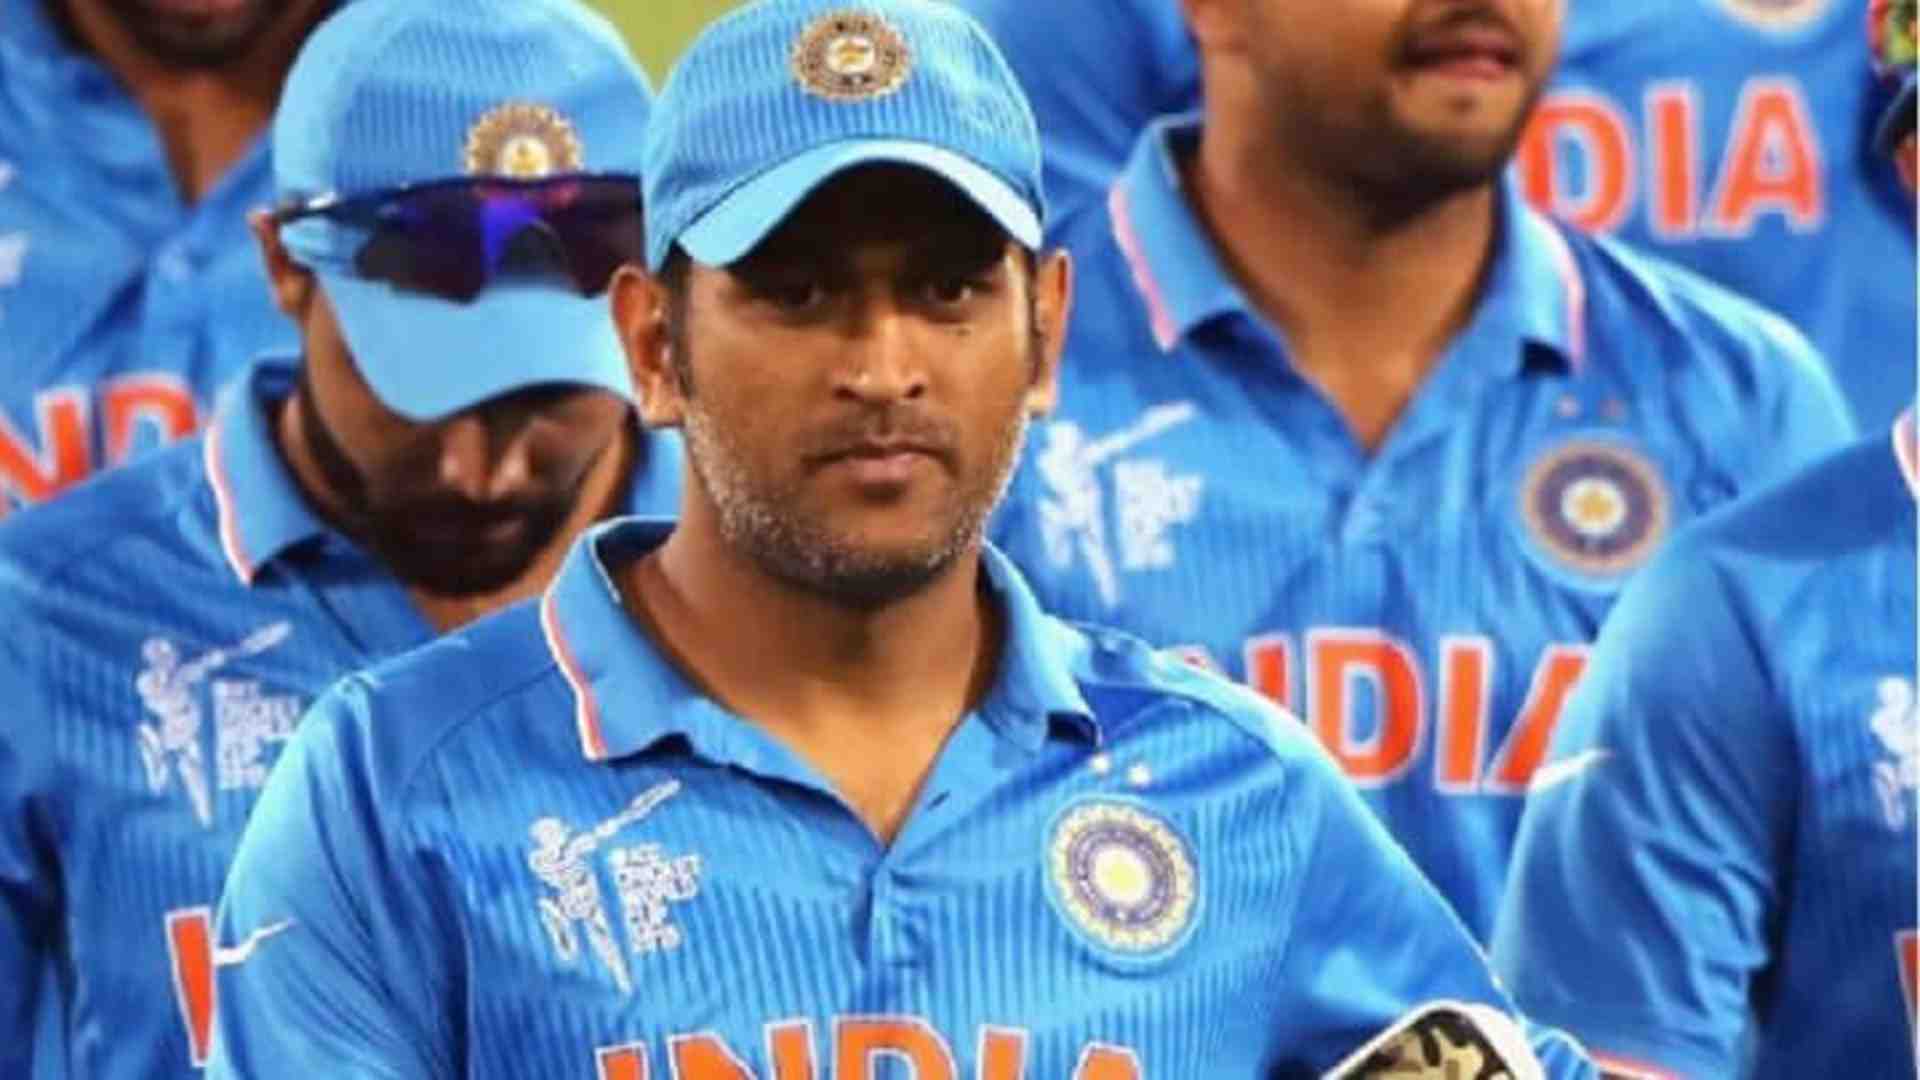 MS Dhoni is considered one of the greatest captains in the history of the game. (Image Credit: Twitter)